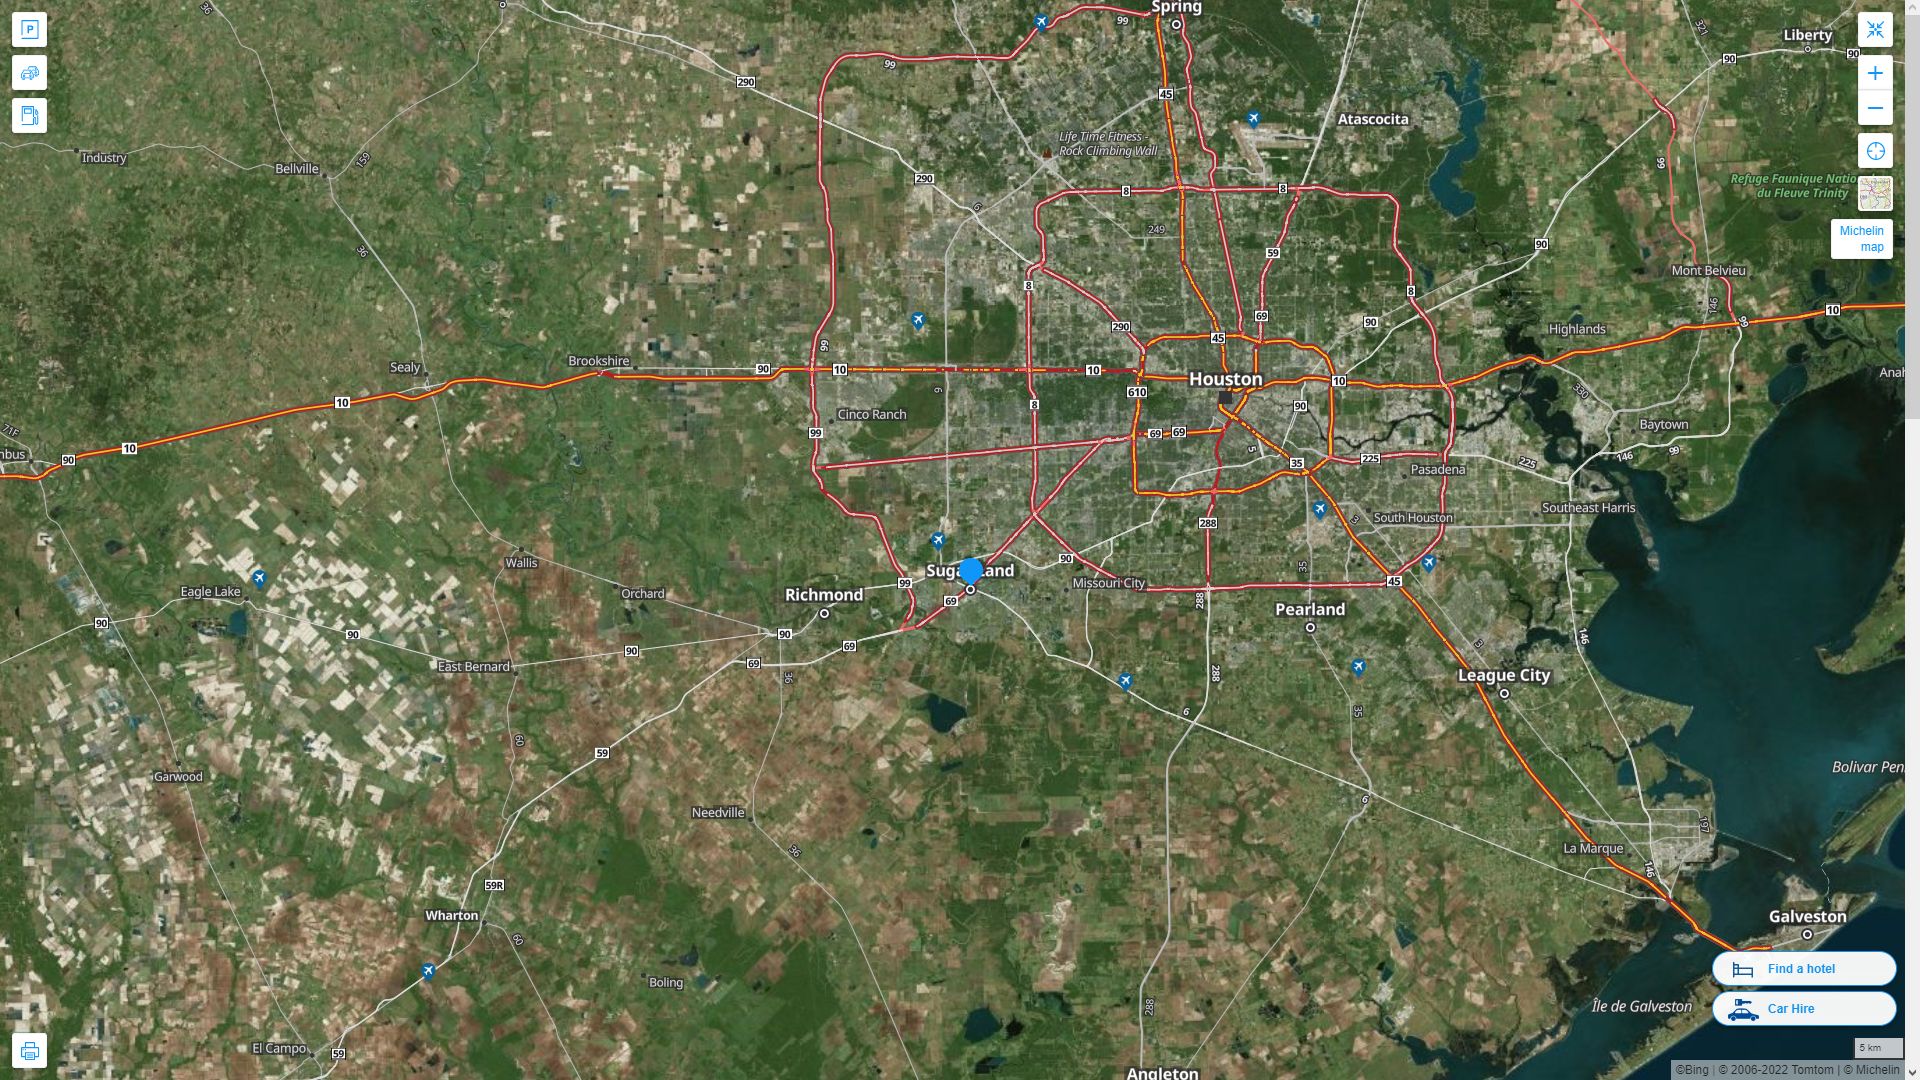 Sugar Land Texas Highway and Road Map with Satellite View